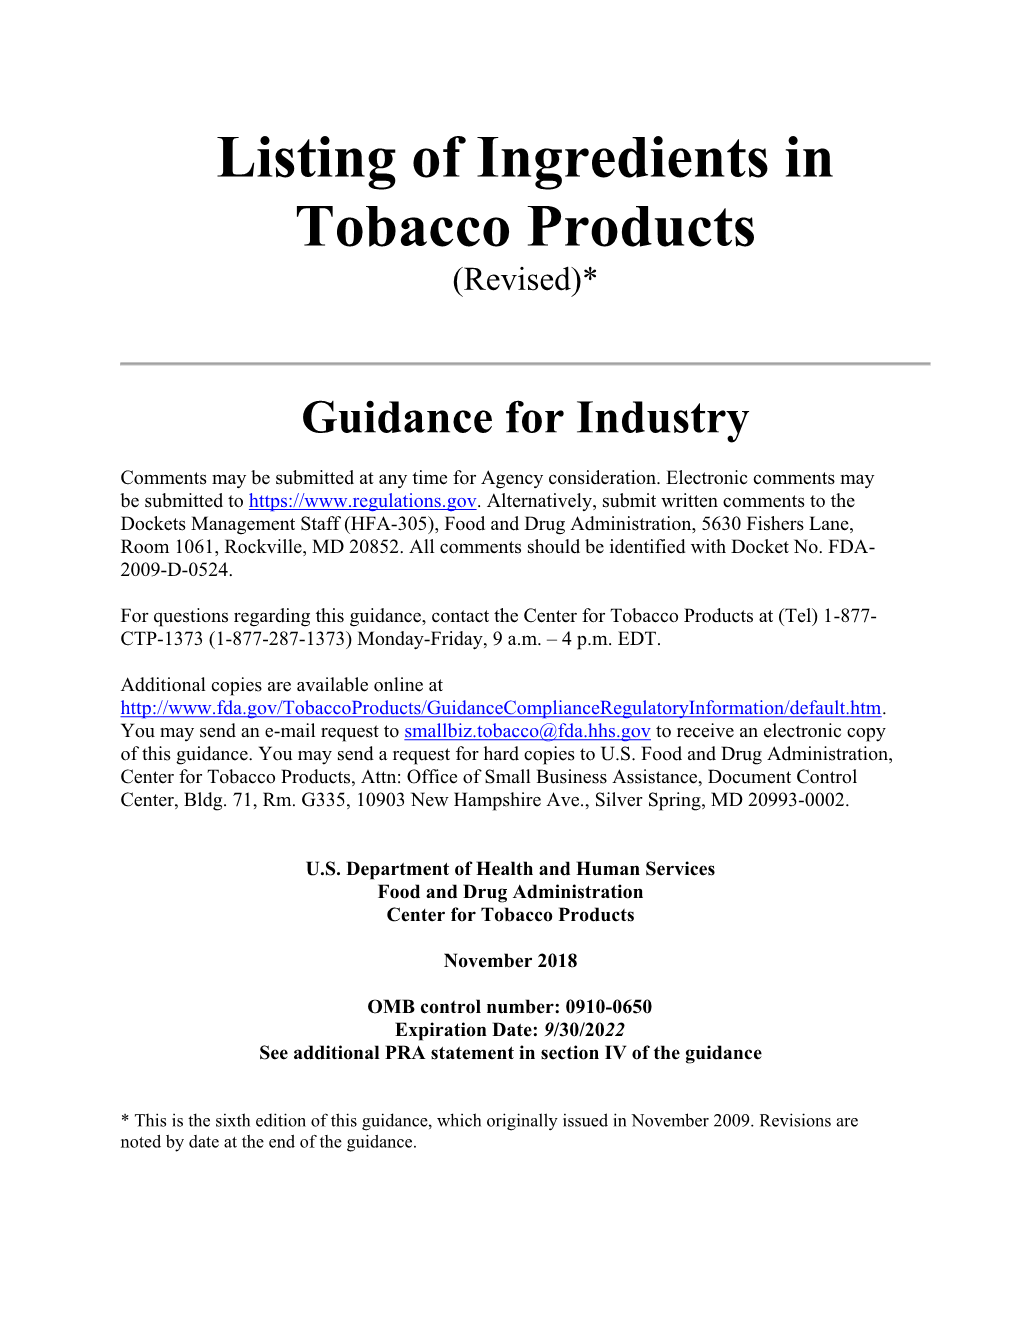 Listing of Ingredients in Tobacco Products Guidance Revised to Reflect Changes 698 in FDA Authorities Over “Deemed” Tobacco Products